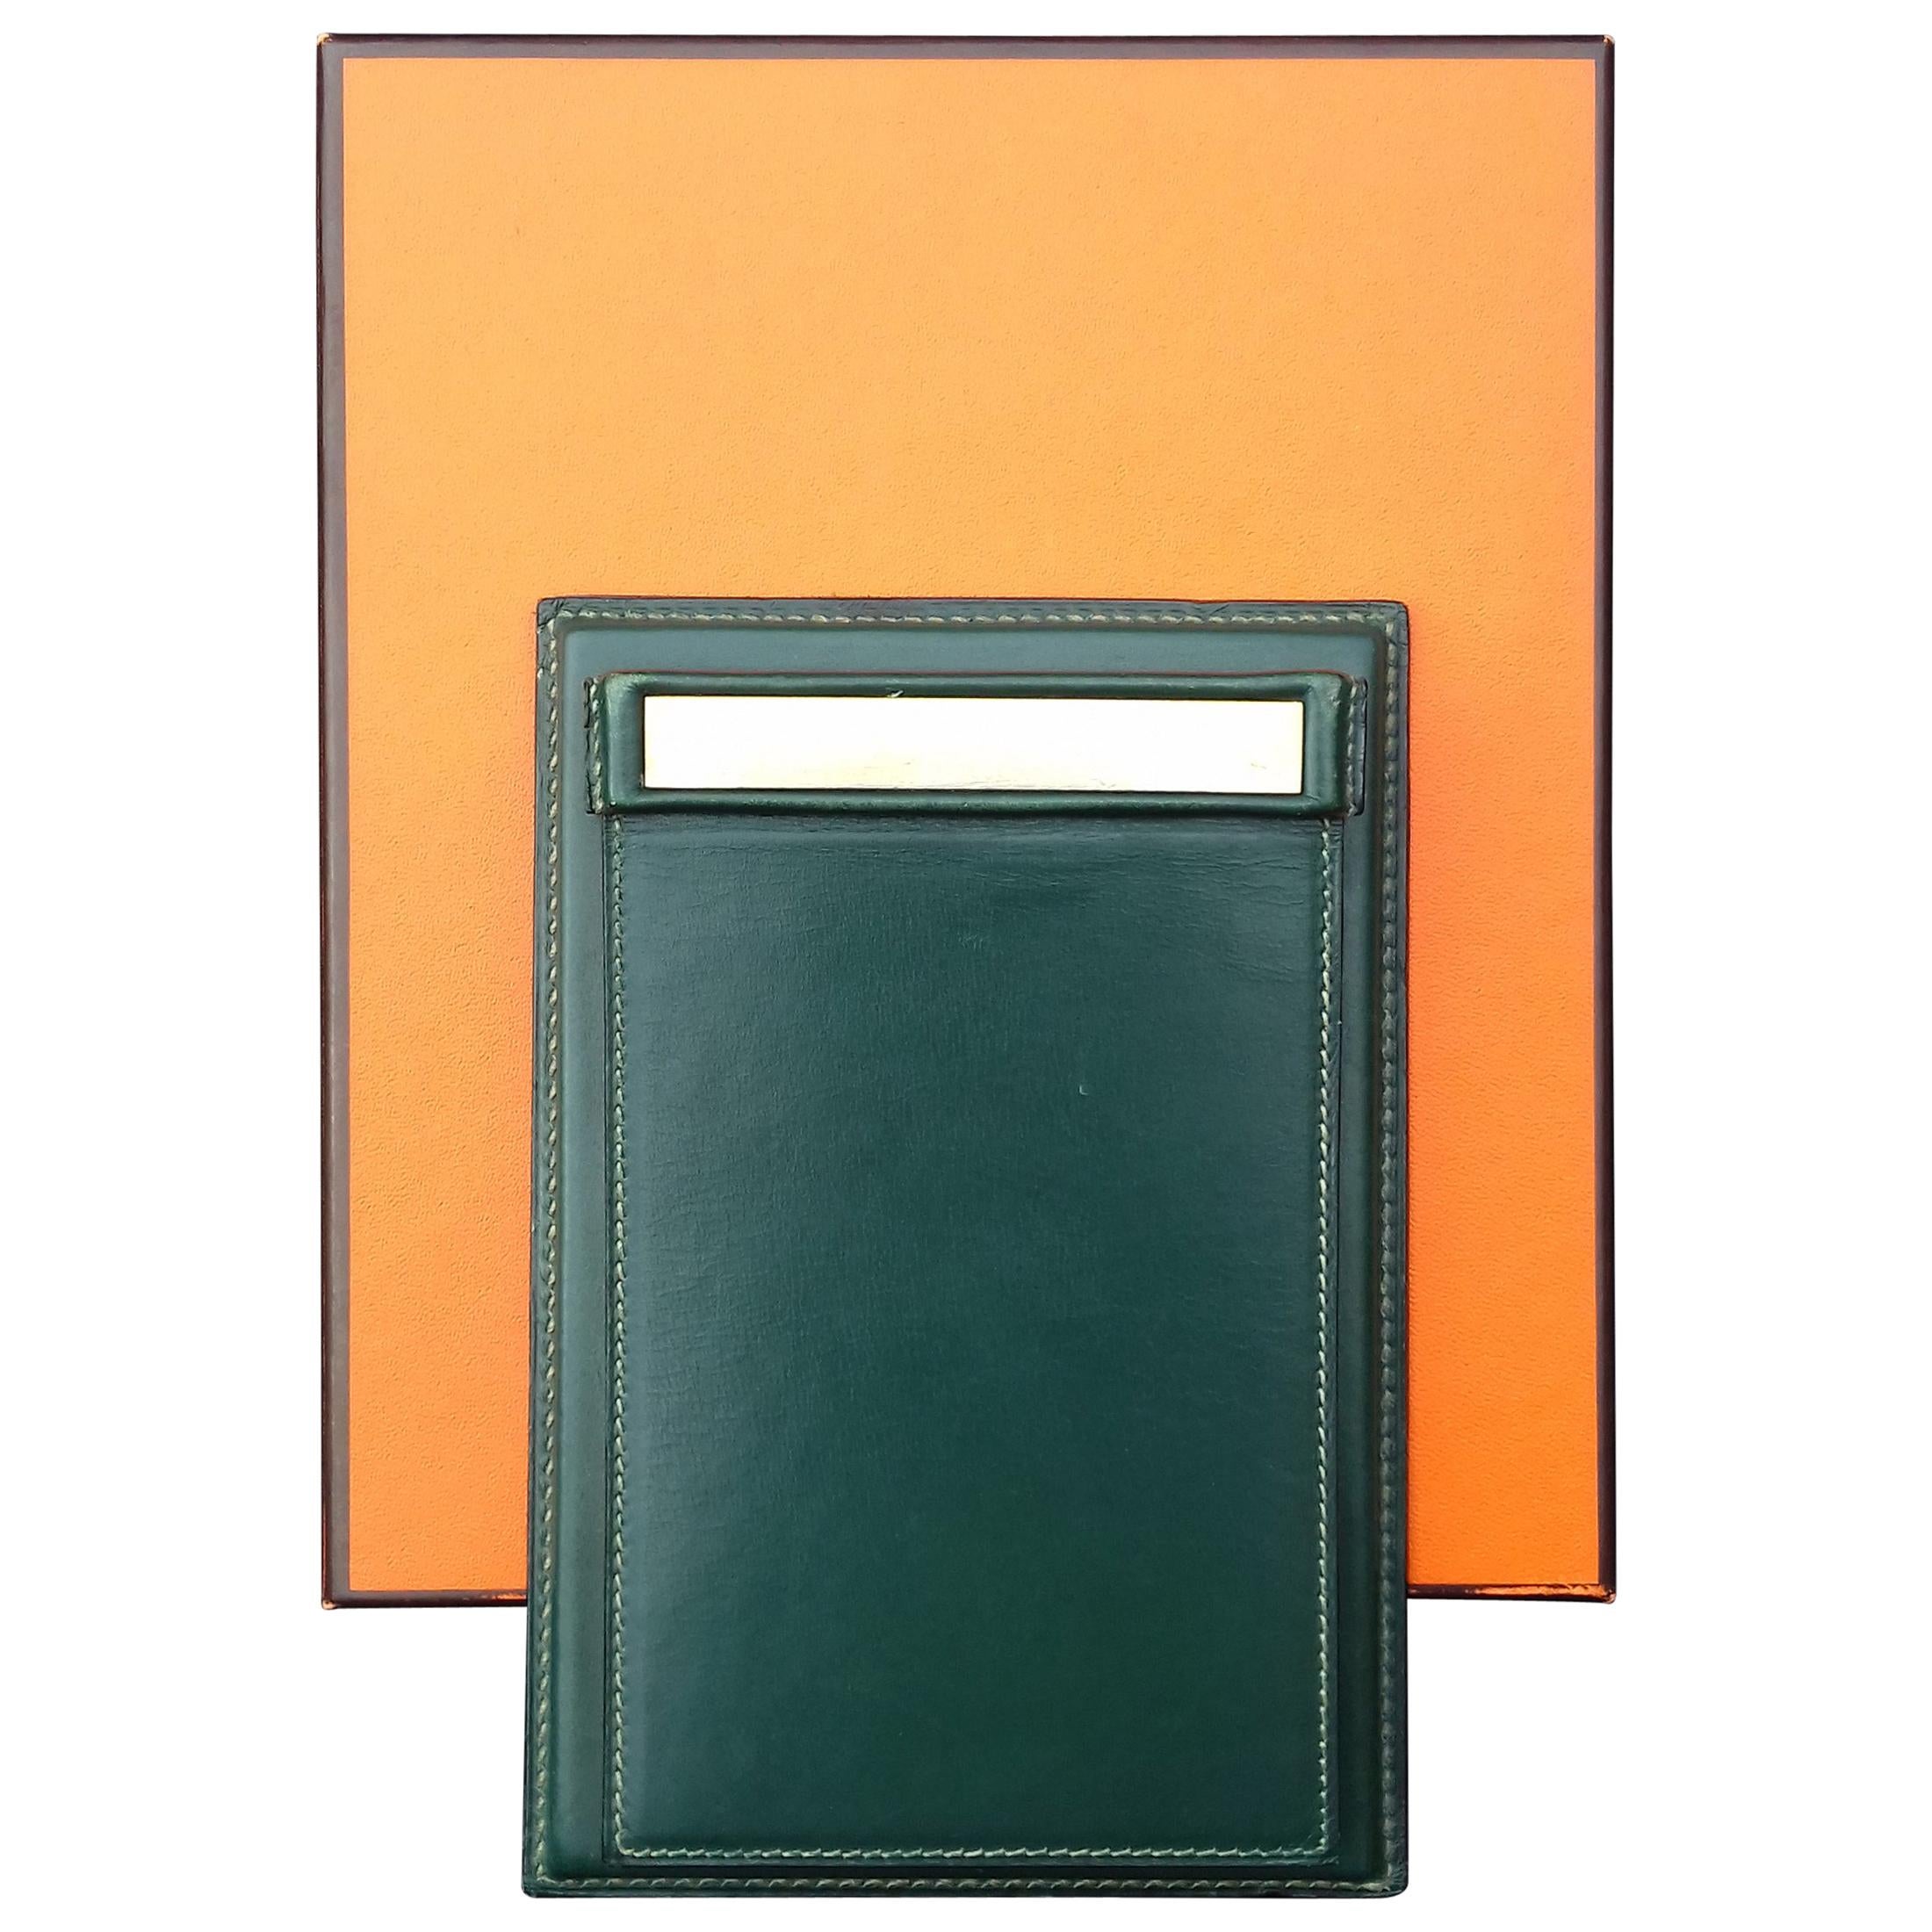 Hermès Vintage Notepad Cover / Holder in Green Box Leather